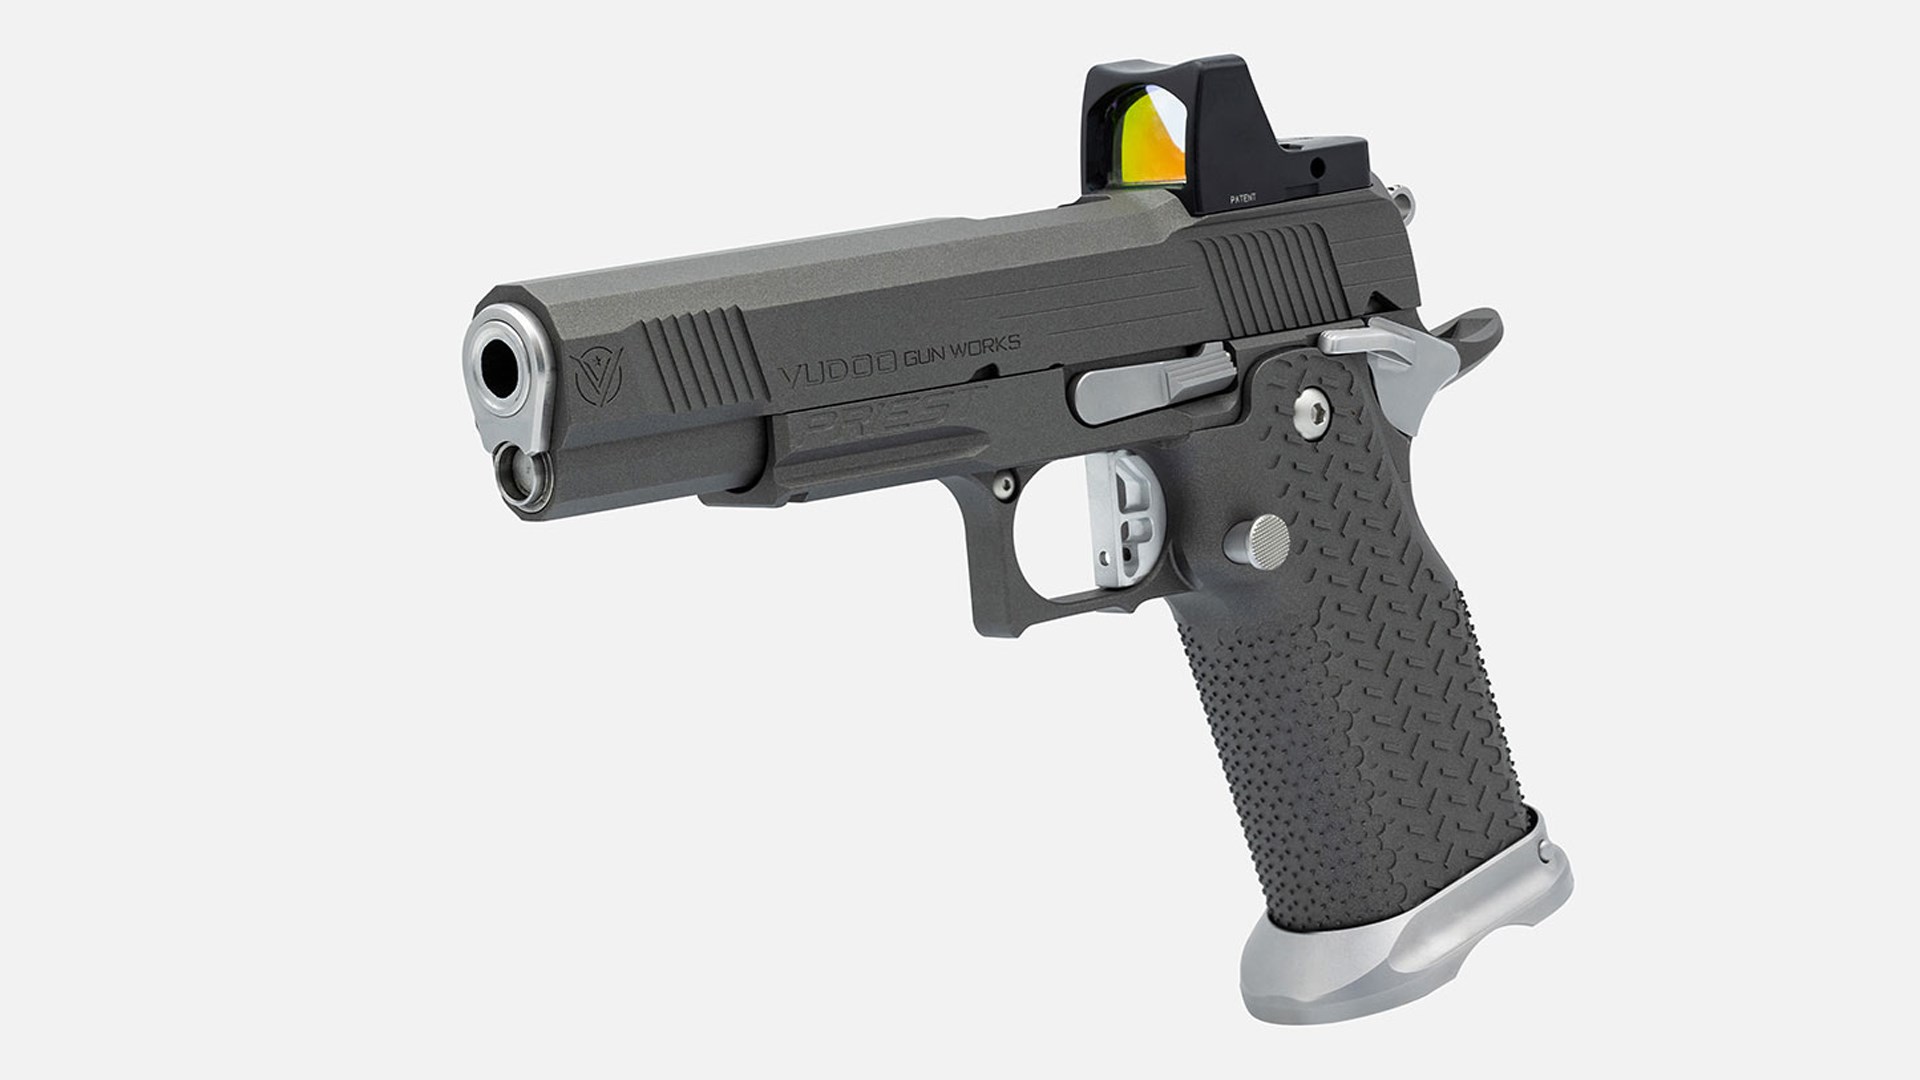 The left side of the Vudoo Priest pistol, shown with gray accents and a red-dot optic mounted on its slide.